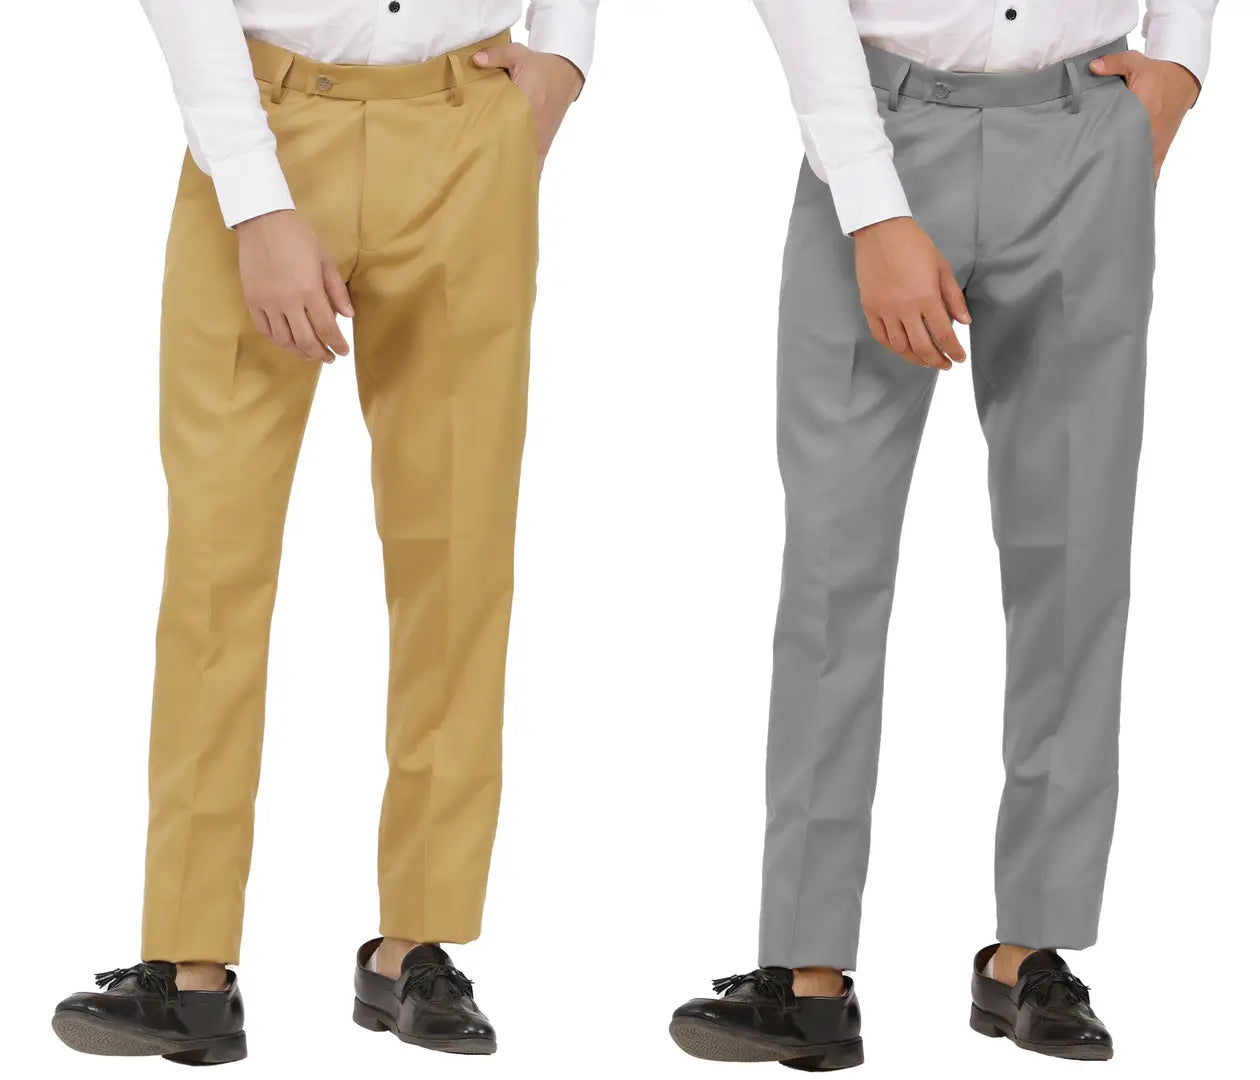 Kundan Men Poly-Viscose Blended Khaki and Light Cot Grey Formal Trousers ( Pack of 2 Trousers )